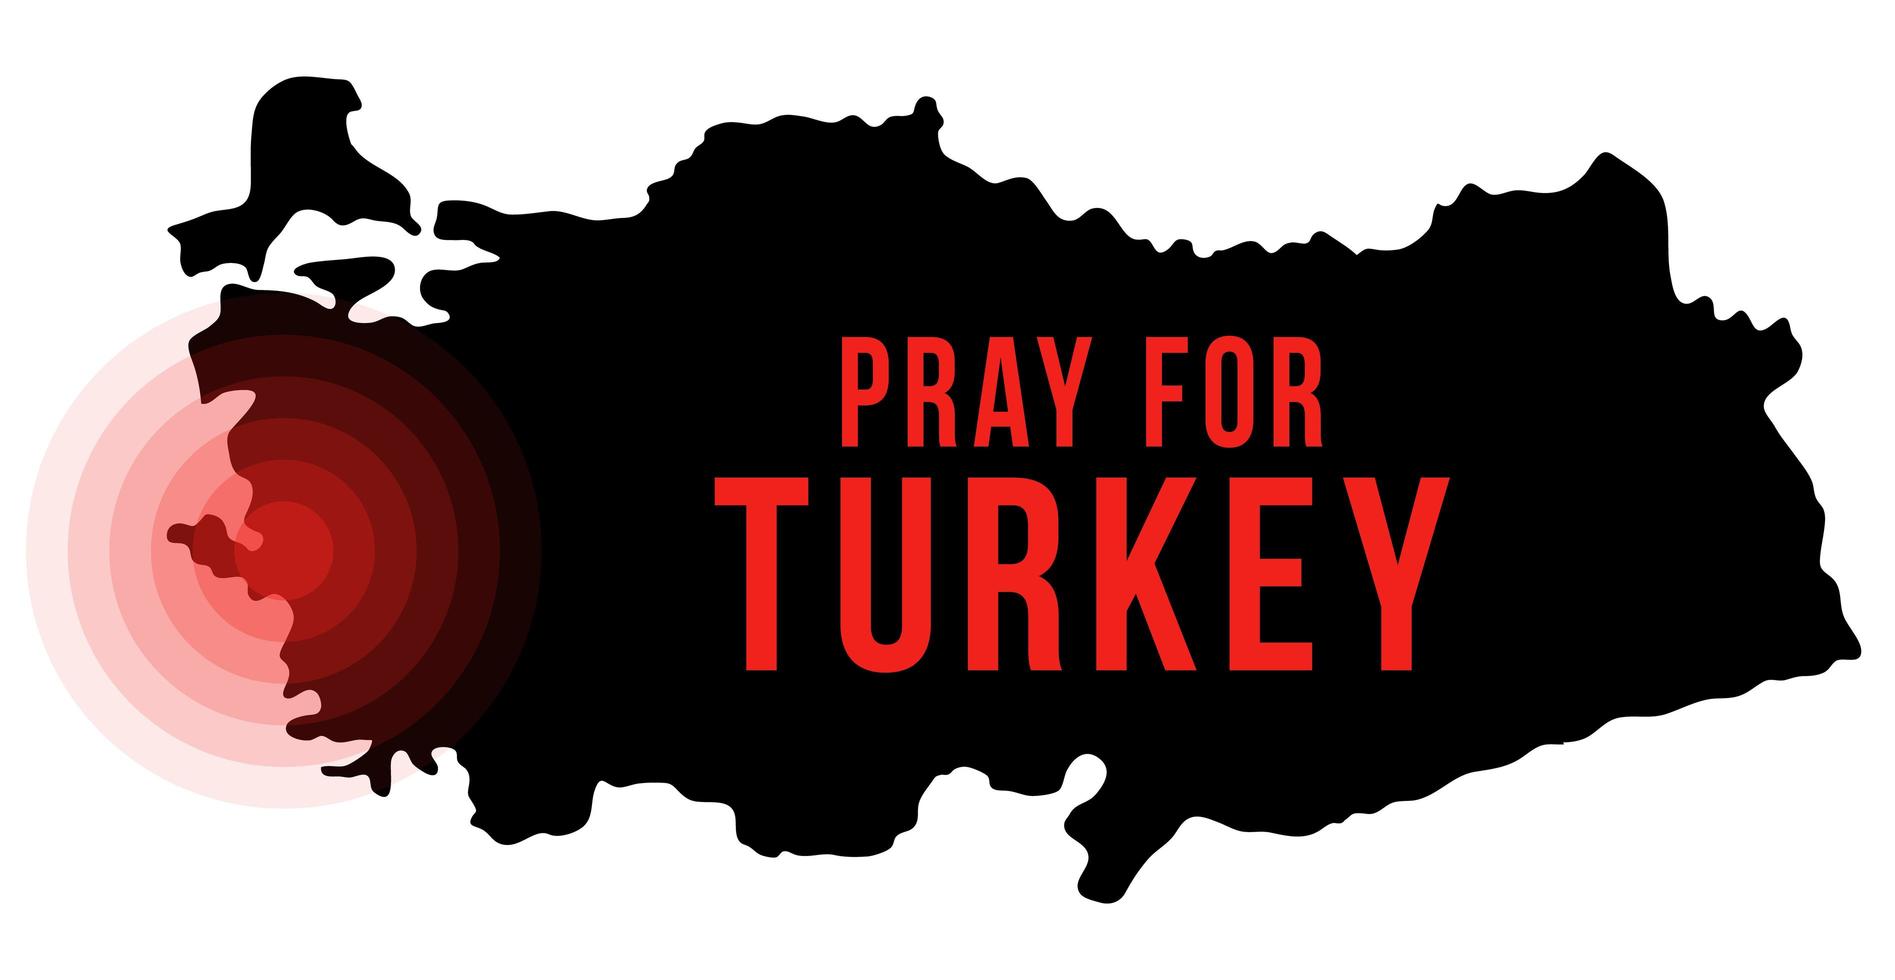 The epicenter of the earthquake in Turkey. Pray for Turkey. Vector illustration map with the text asking prays due to a strong earthquake near Izmir on October 30